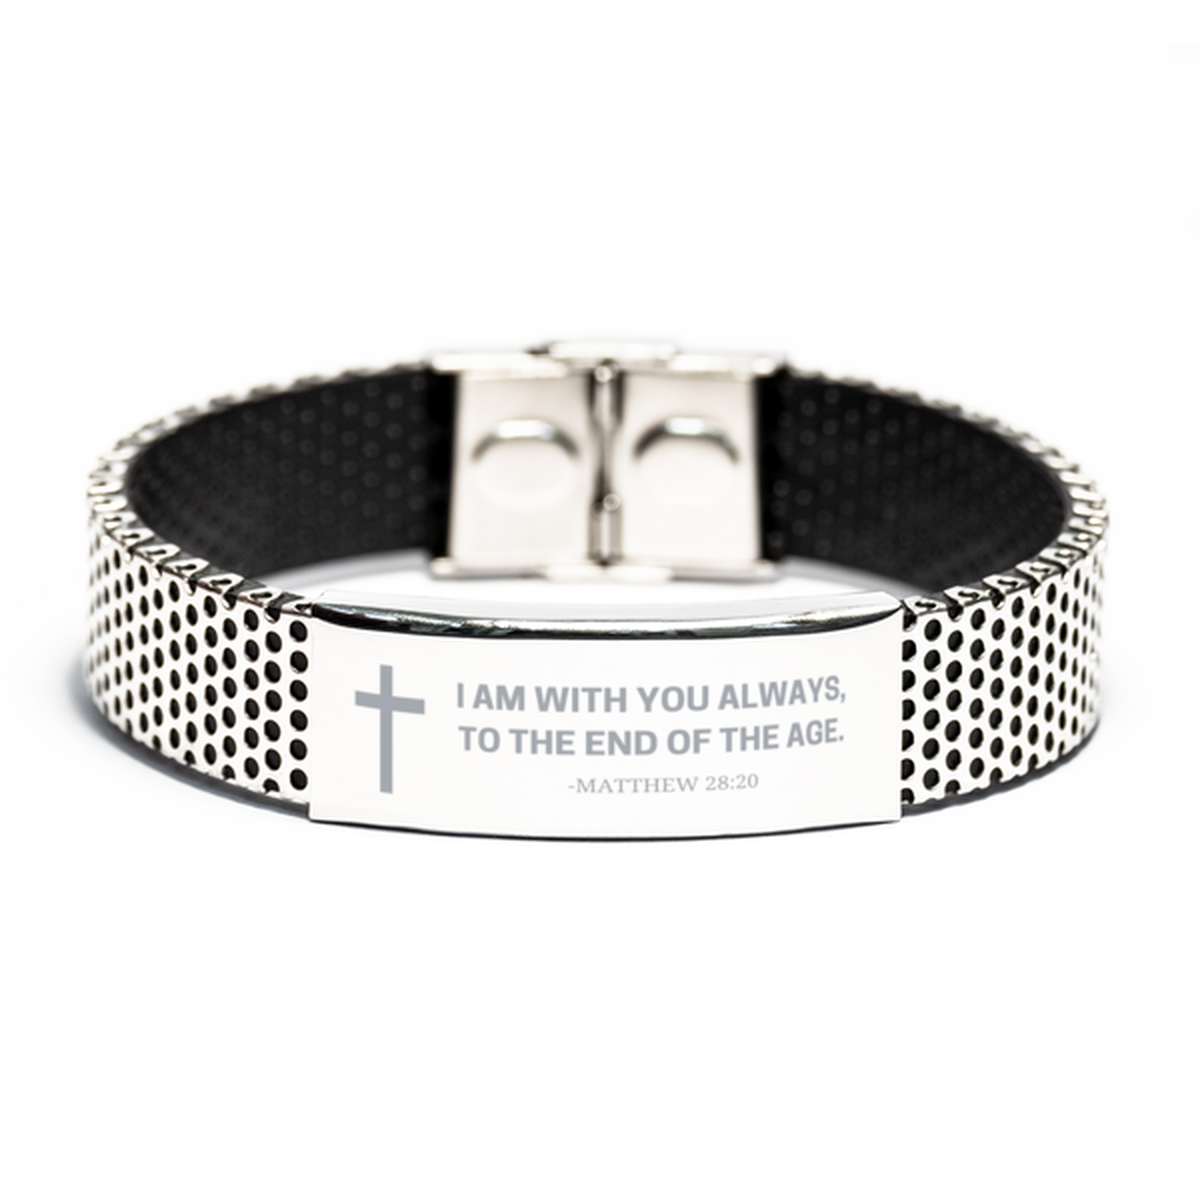 Baptism Gifts For Teenage Boys Girls, Christian Bible Verse Stainless Steel Bracelet, I am with you always, Catholic Confirmation Gifts for Son, Godson, Grandson, Nephew